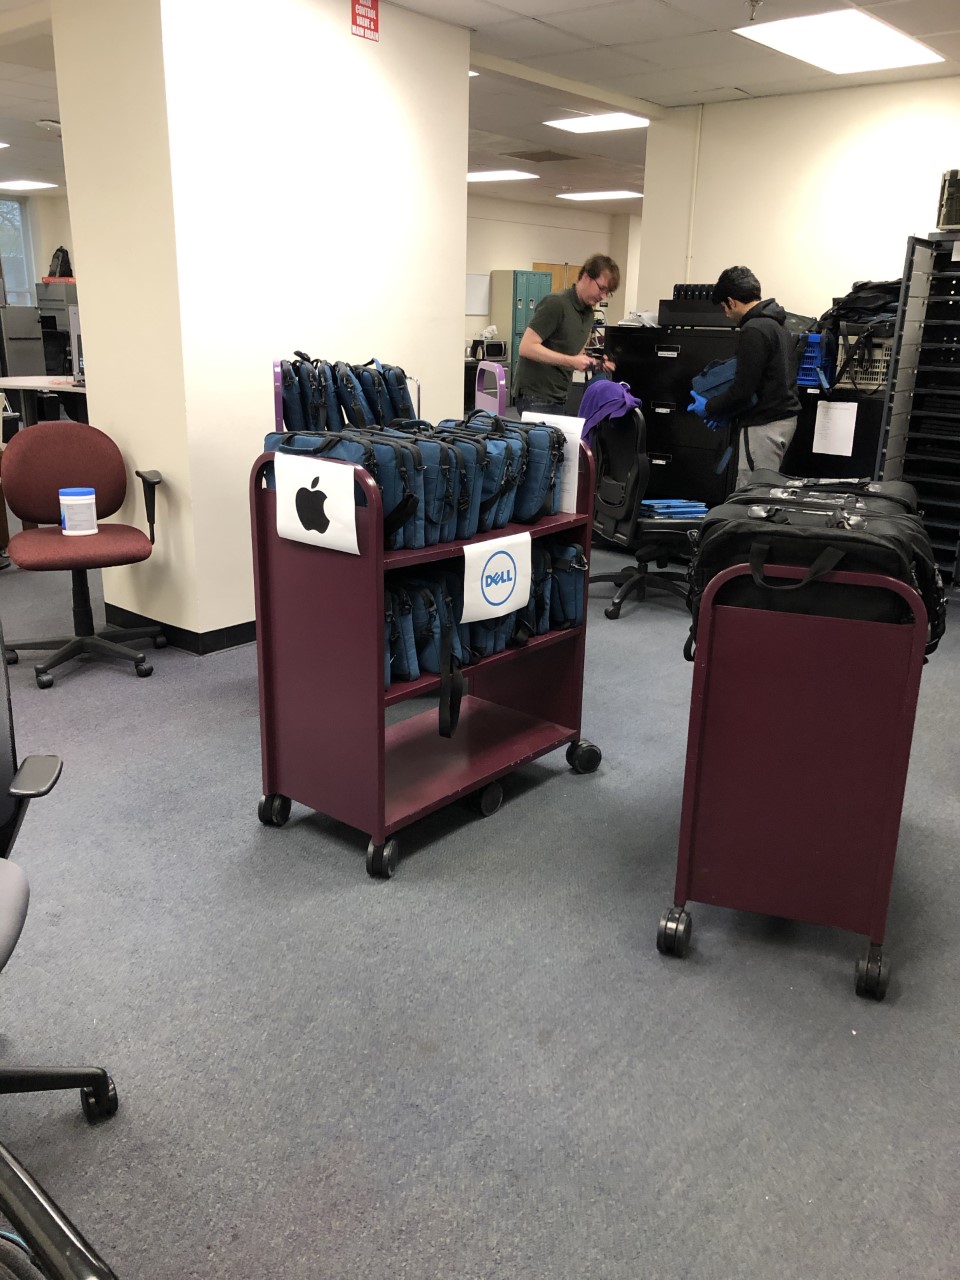 two staff members prepare carts of laptops for check out